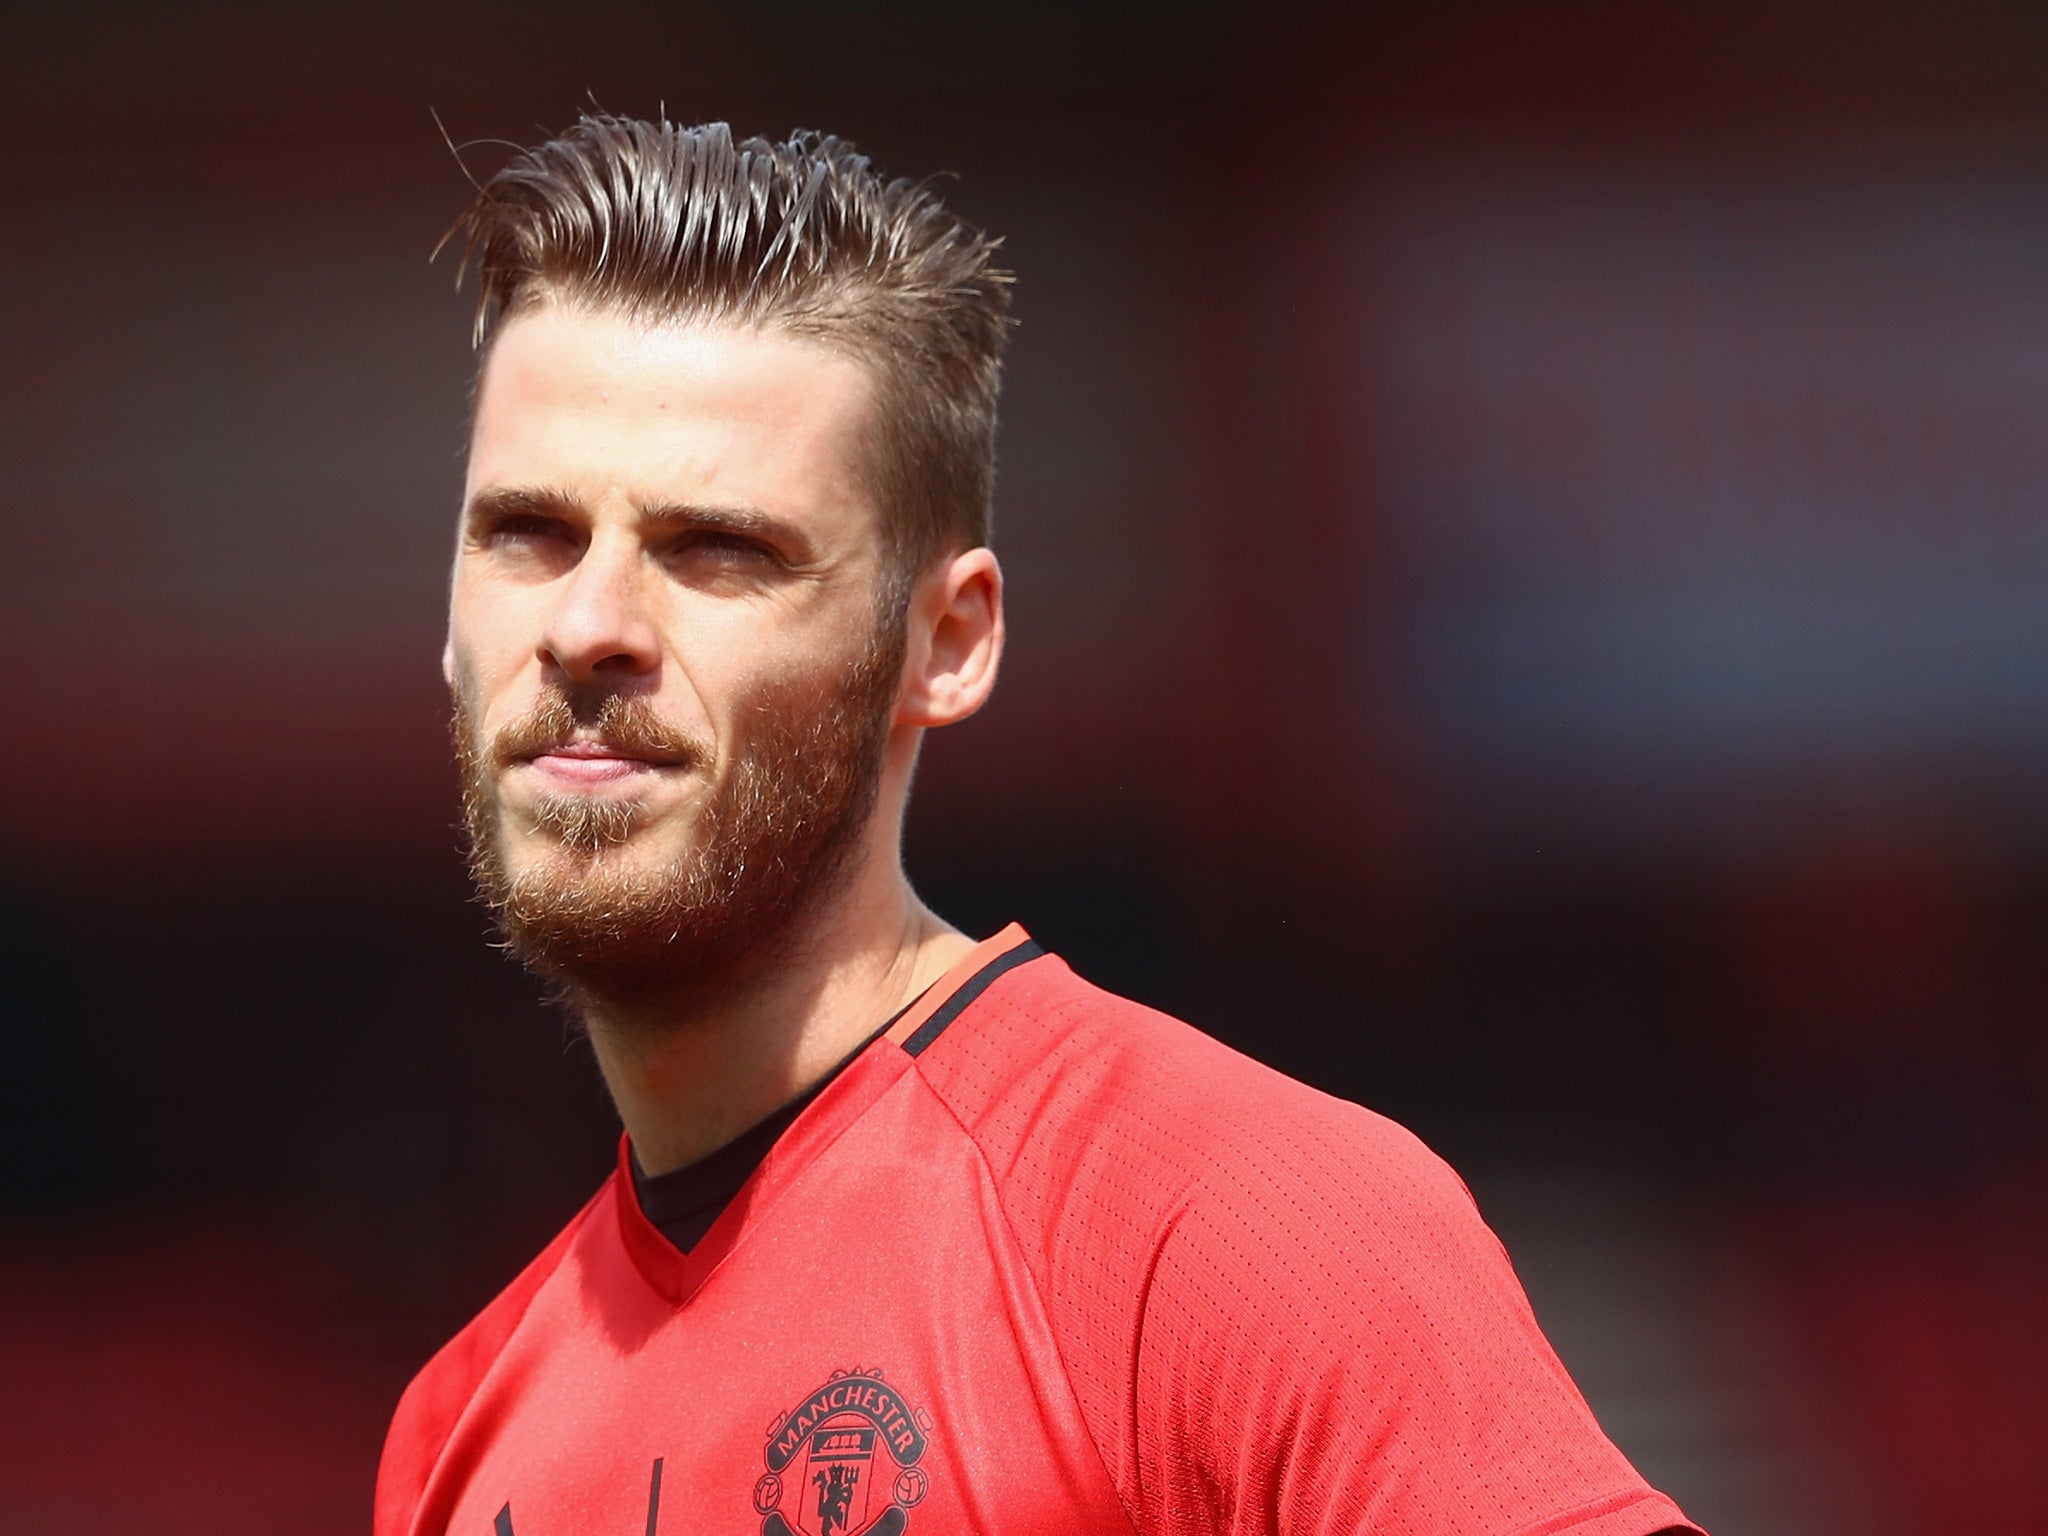 De Gea was implicated in the case shortly before Spain's Euros campaign